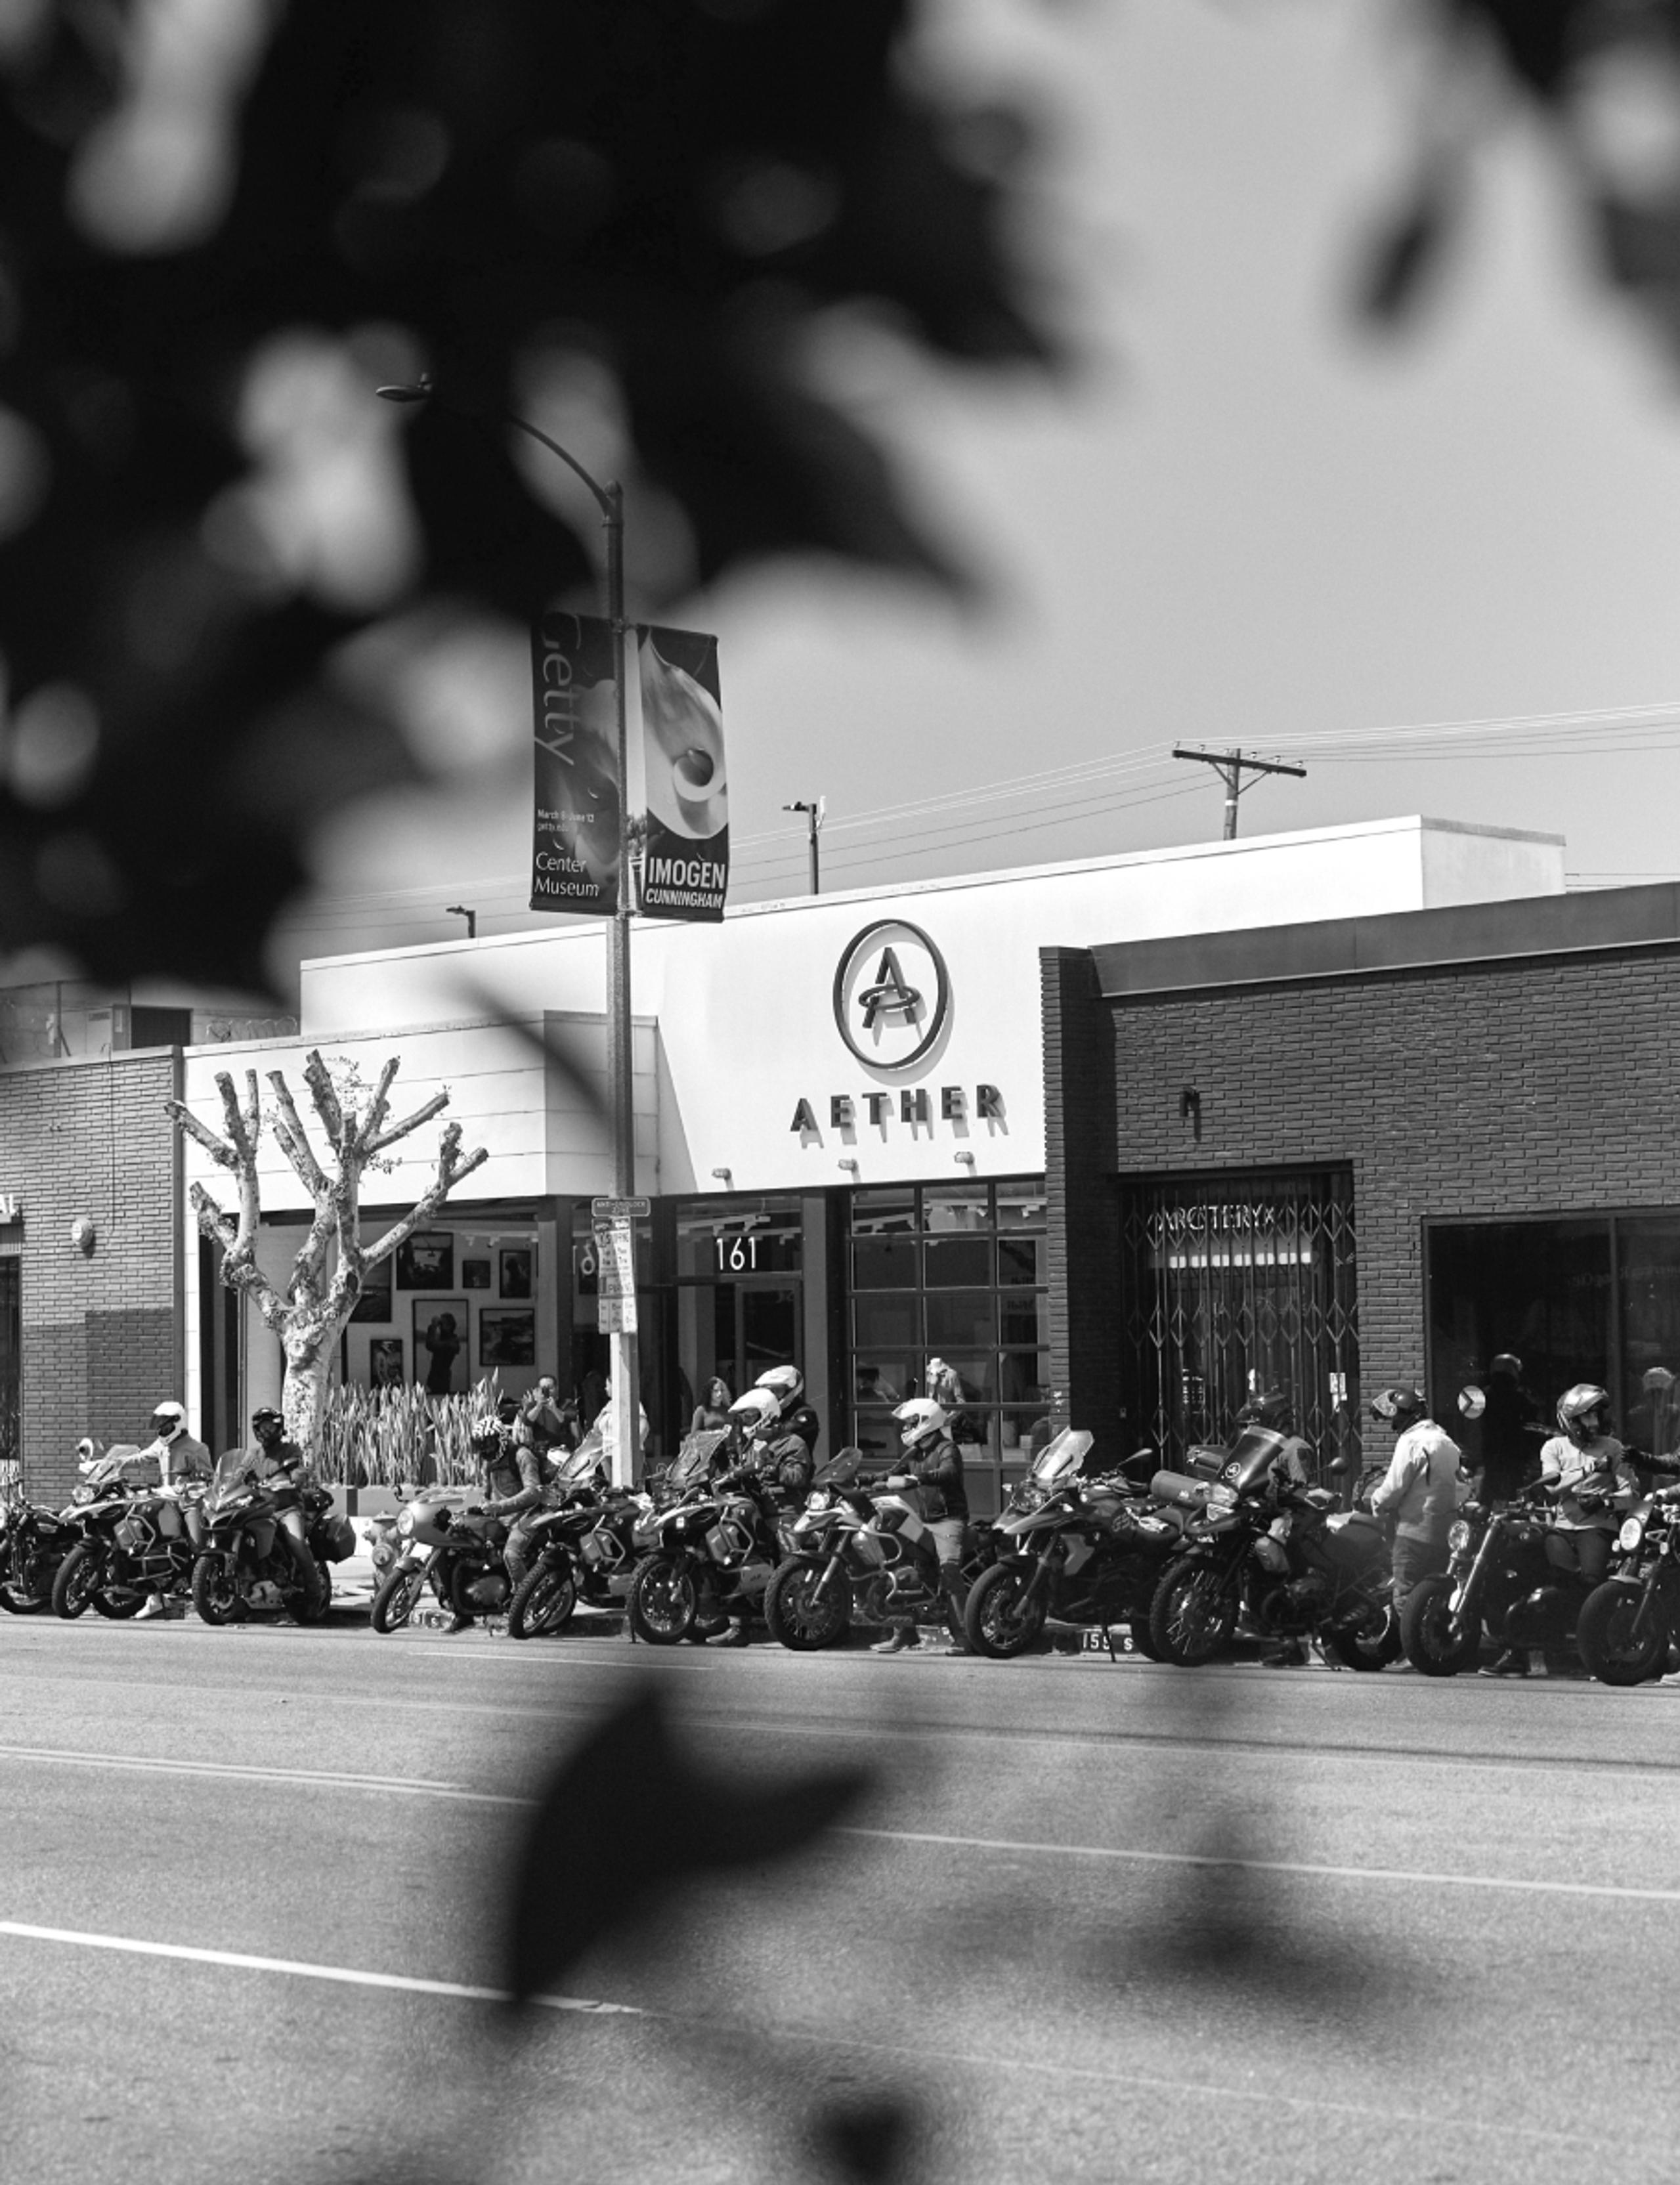 Black and white photo of motorcyclists lined up in front of AETHER store in Los Angeles